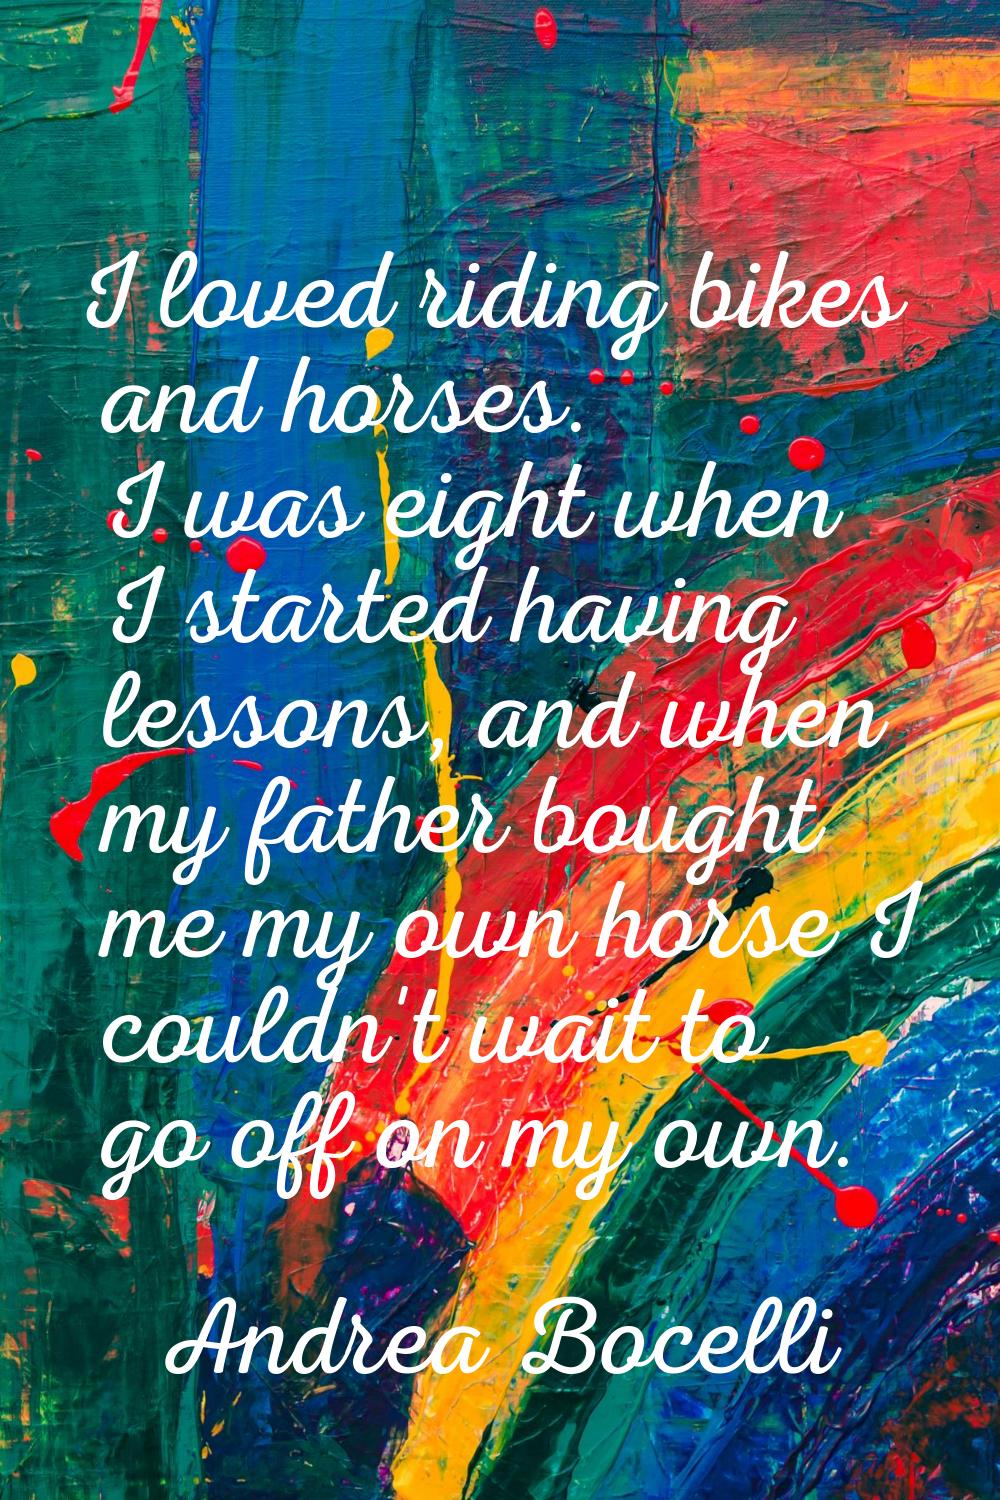 I loved riding bikes and horses. I was eight when I started having lessons, and when my father boug